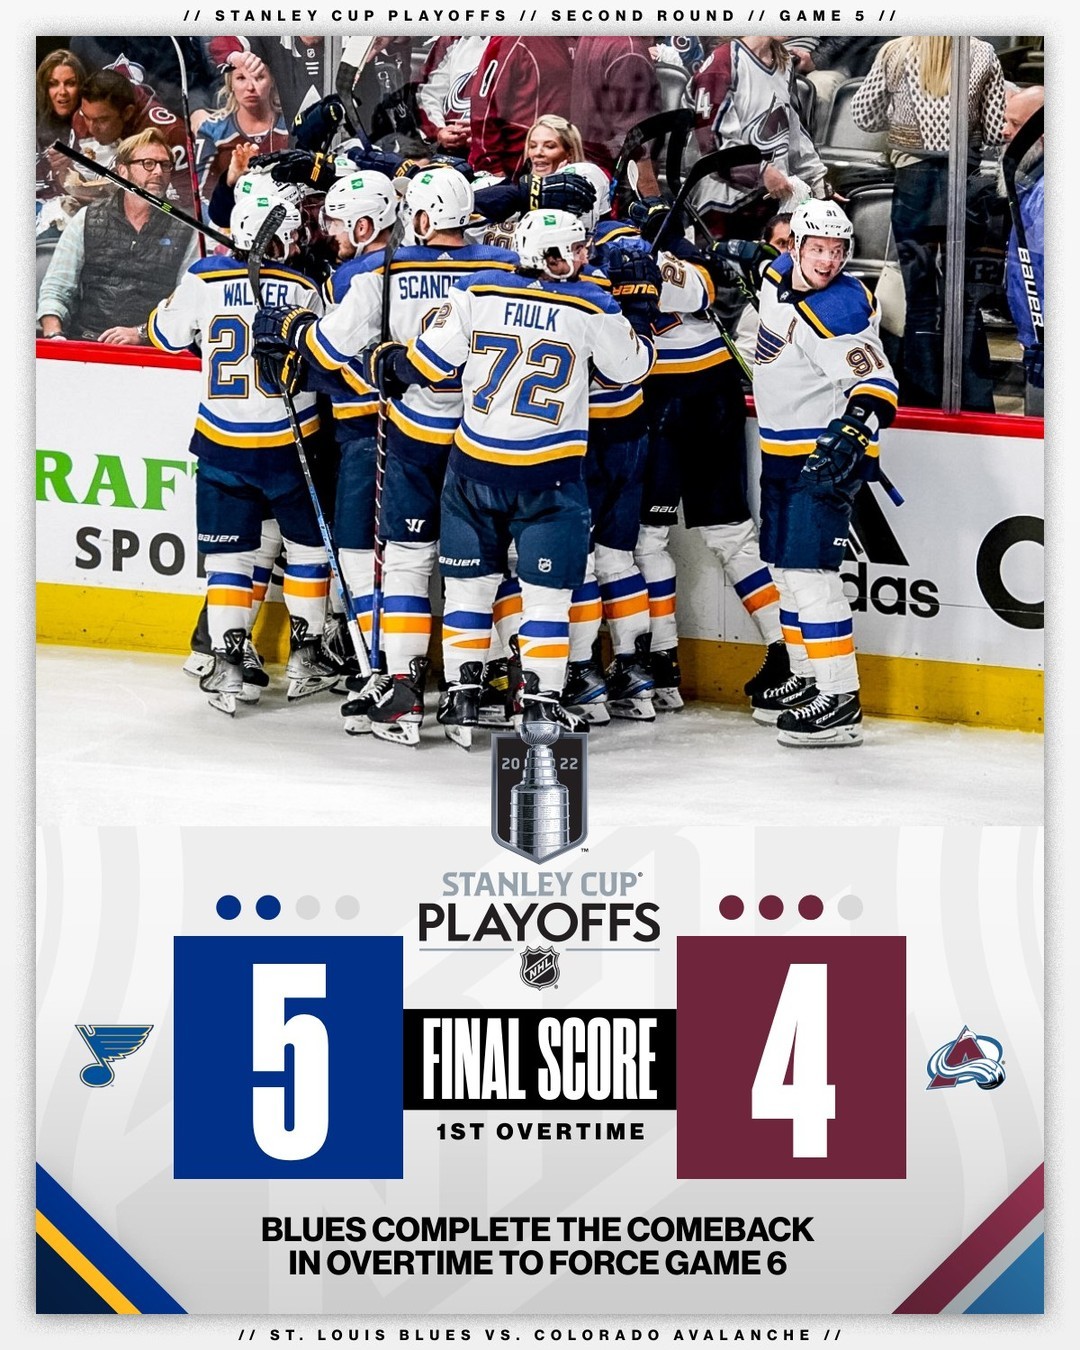 That's the @stlouisblues' music!  #StanleyCup...